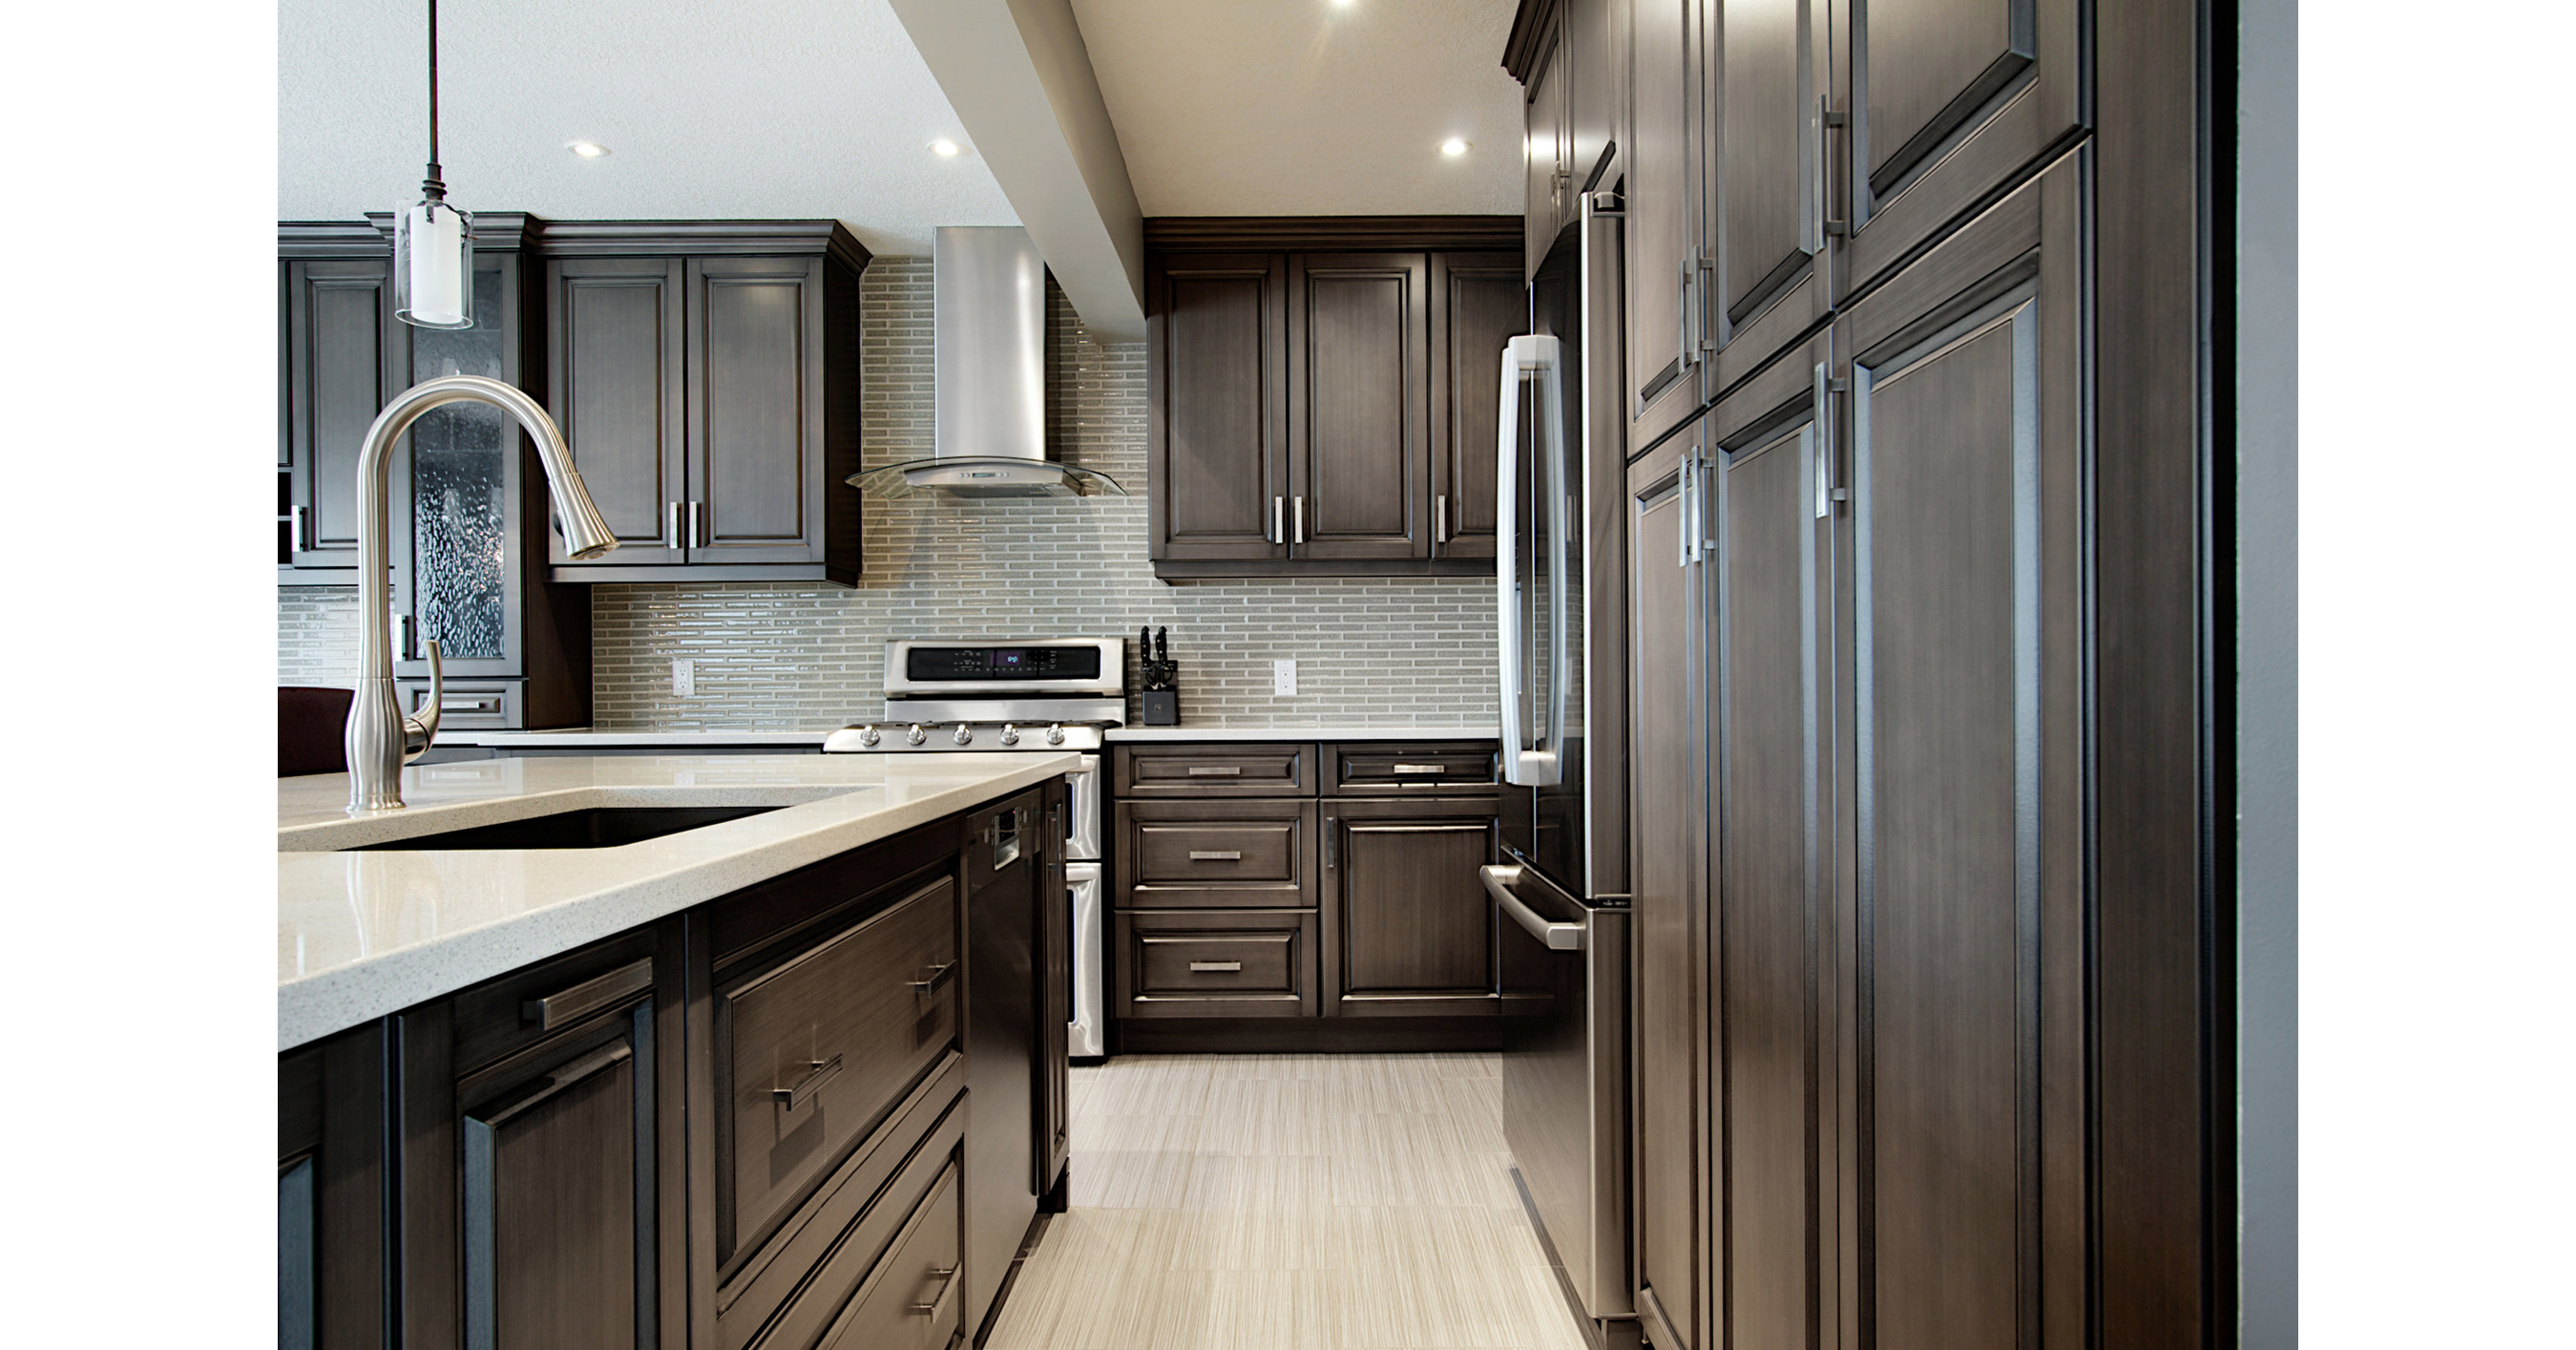 Saskatoon S Superior Cabinets Acquired By The Buller Family